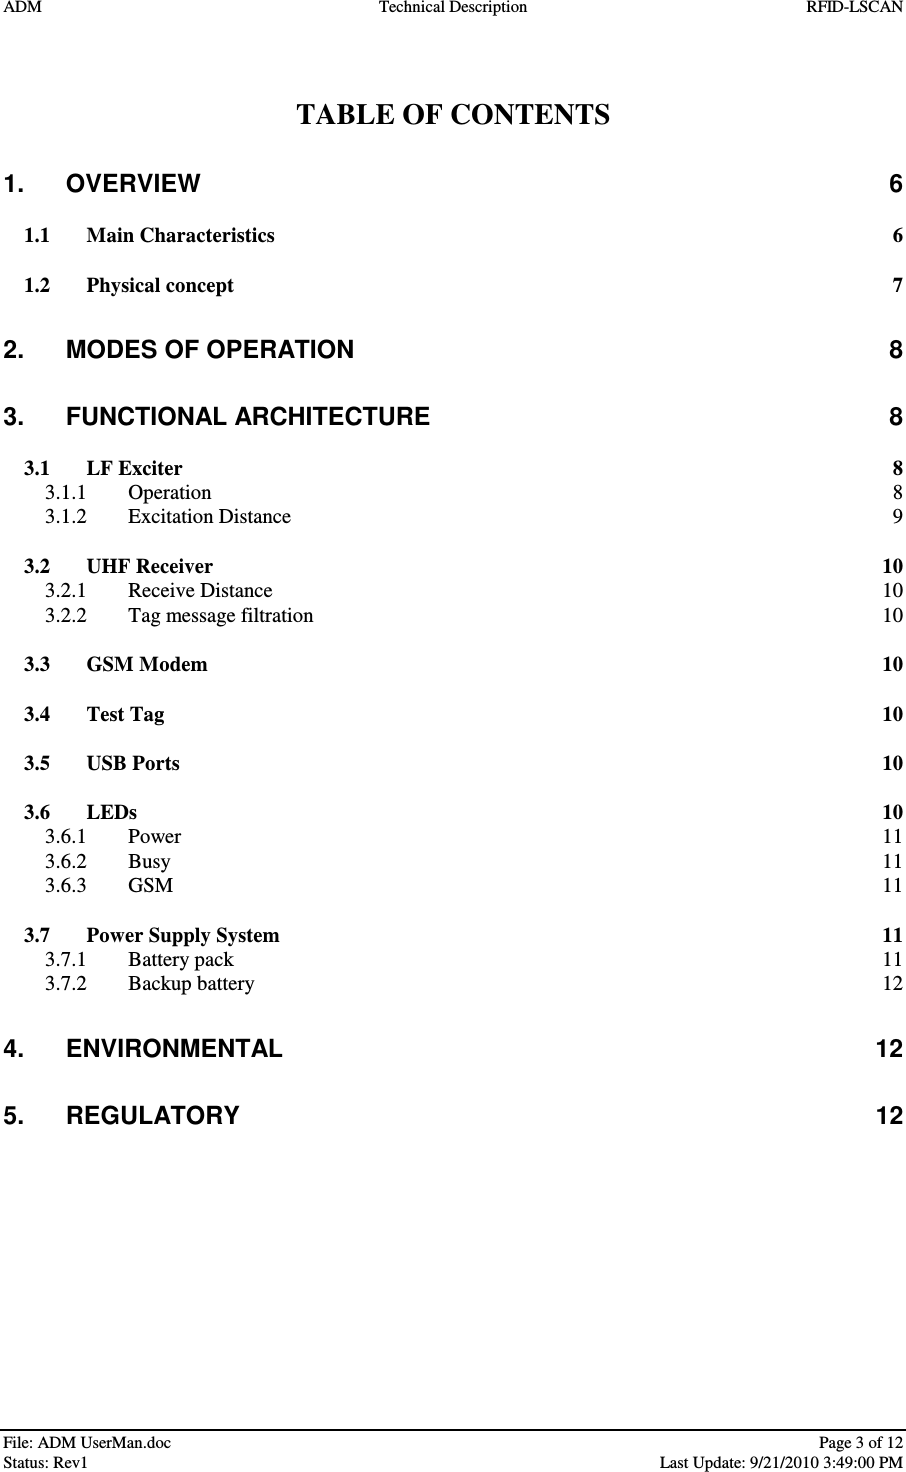 ADM  Technical Description  RFID-LSCAN   File: ADM UserMan.doc    Page 3 of 12  Status: Rev1    Last Update: 9/21/2010 3:49:00 PM   TABLE OF CONTENTS 1. OVERVIEW  6 1.1 Main Characteristics  6 1.2 Physical concept  7 2. MODES OF OPERATION  8 3. FUNCTIONAL ARCHITECTURE  8 3.1 LF Exciter  8 3.1.1 Operation  8 3.1.2 Excitation Distance  9 3.2 UHF Receiver  10 3.2.1 Receive Distance  10 3.2.2 Tag message filtration  10 3.3 GSM Modem  10 3.4 Test Tag  10 3.5 USB Ports  10 3.6 LEDs  10 3.6.1 Power  11 3.6.2 Busy  11 3.6.3 GSM  11 3.7 Power Supply System  11 3.7.1 Battery pack  11 3.7.2 Backup battery  12 4. ENVIRONMENTAL  12 5. REGULATORY  12  